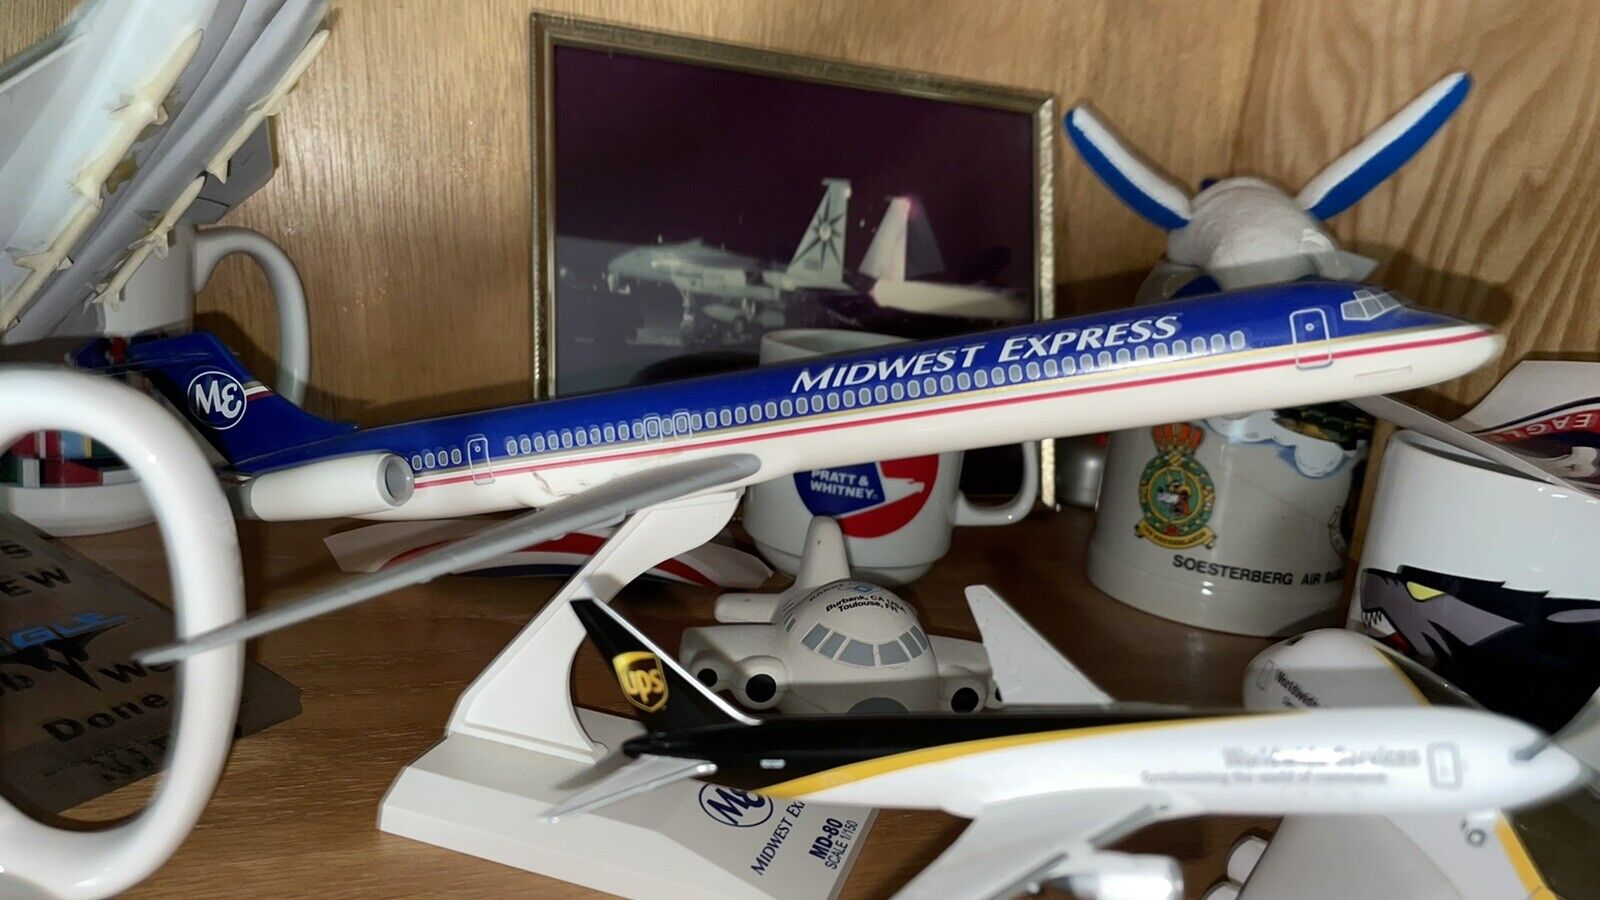 midwest express md80 